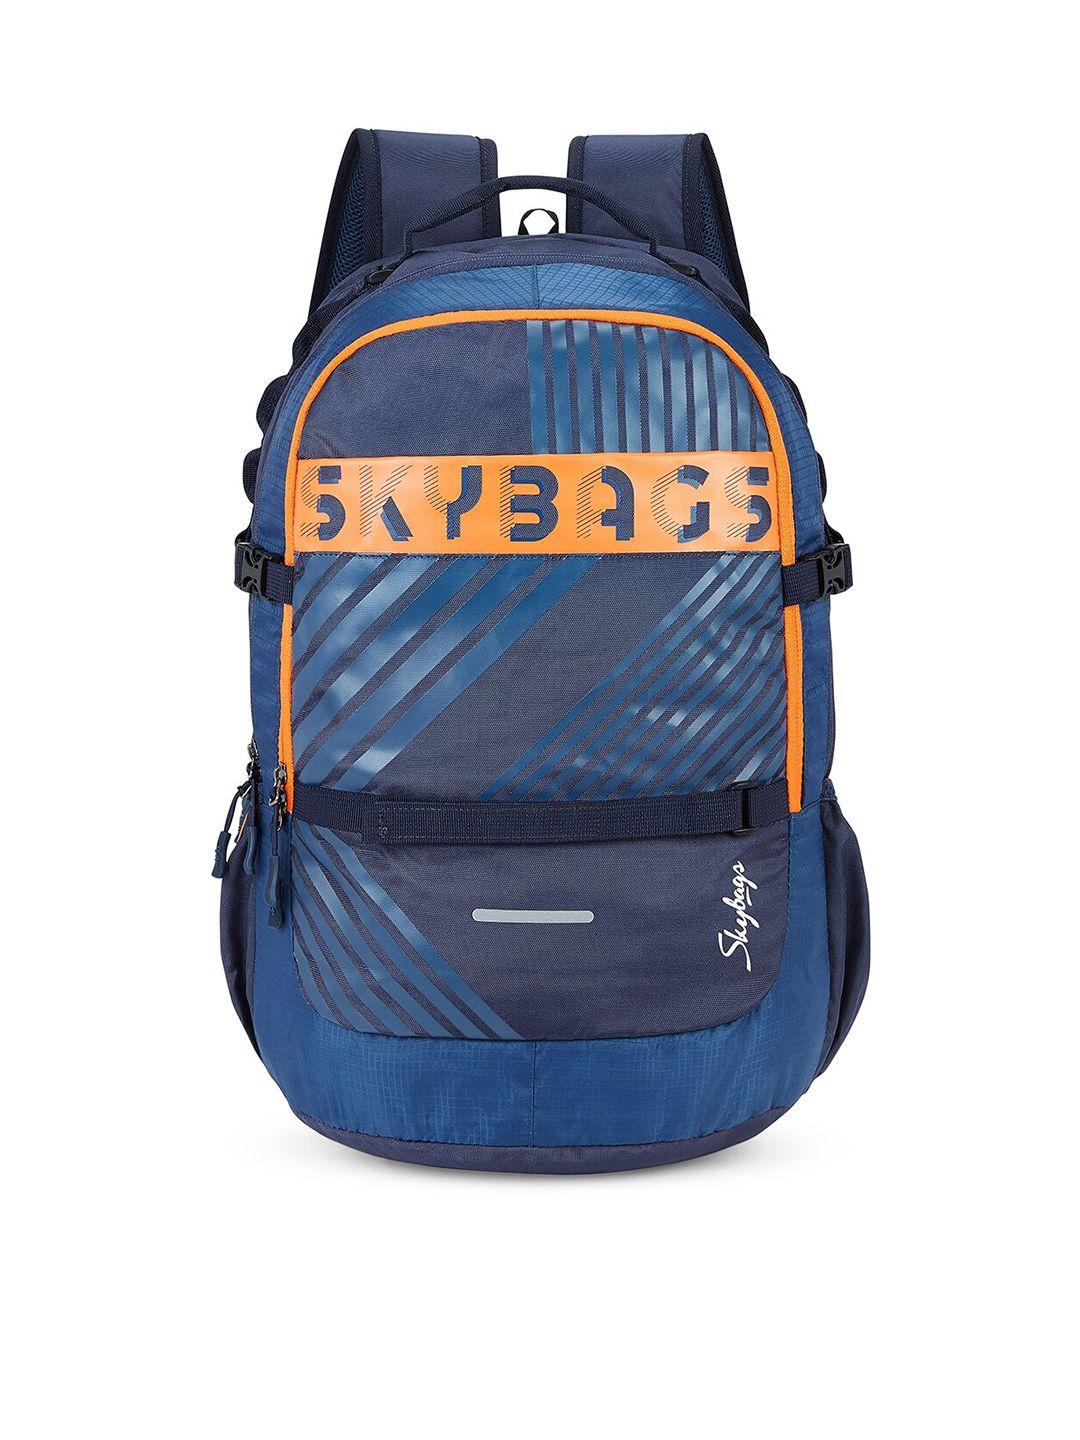 skybags brand logo printed non-padded backpack